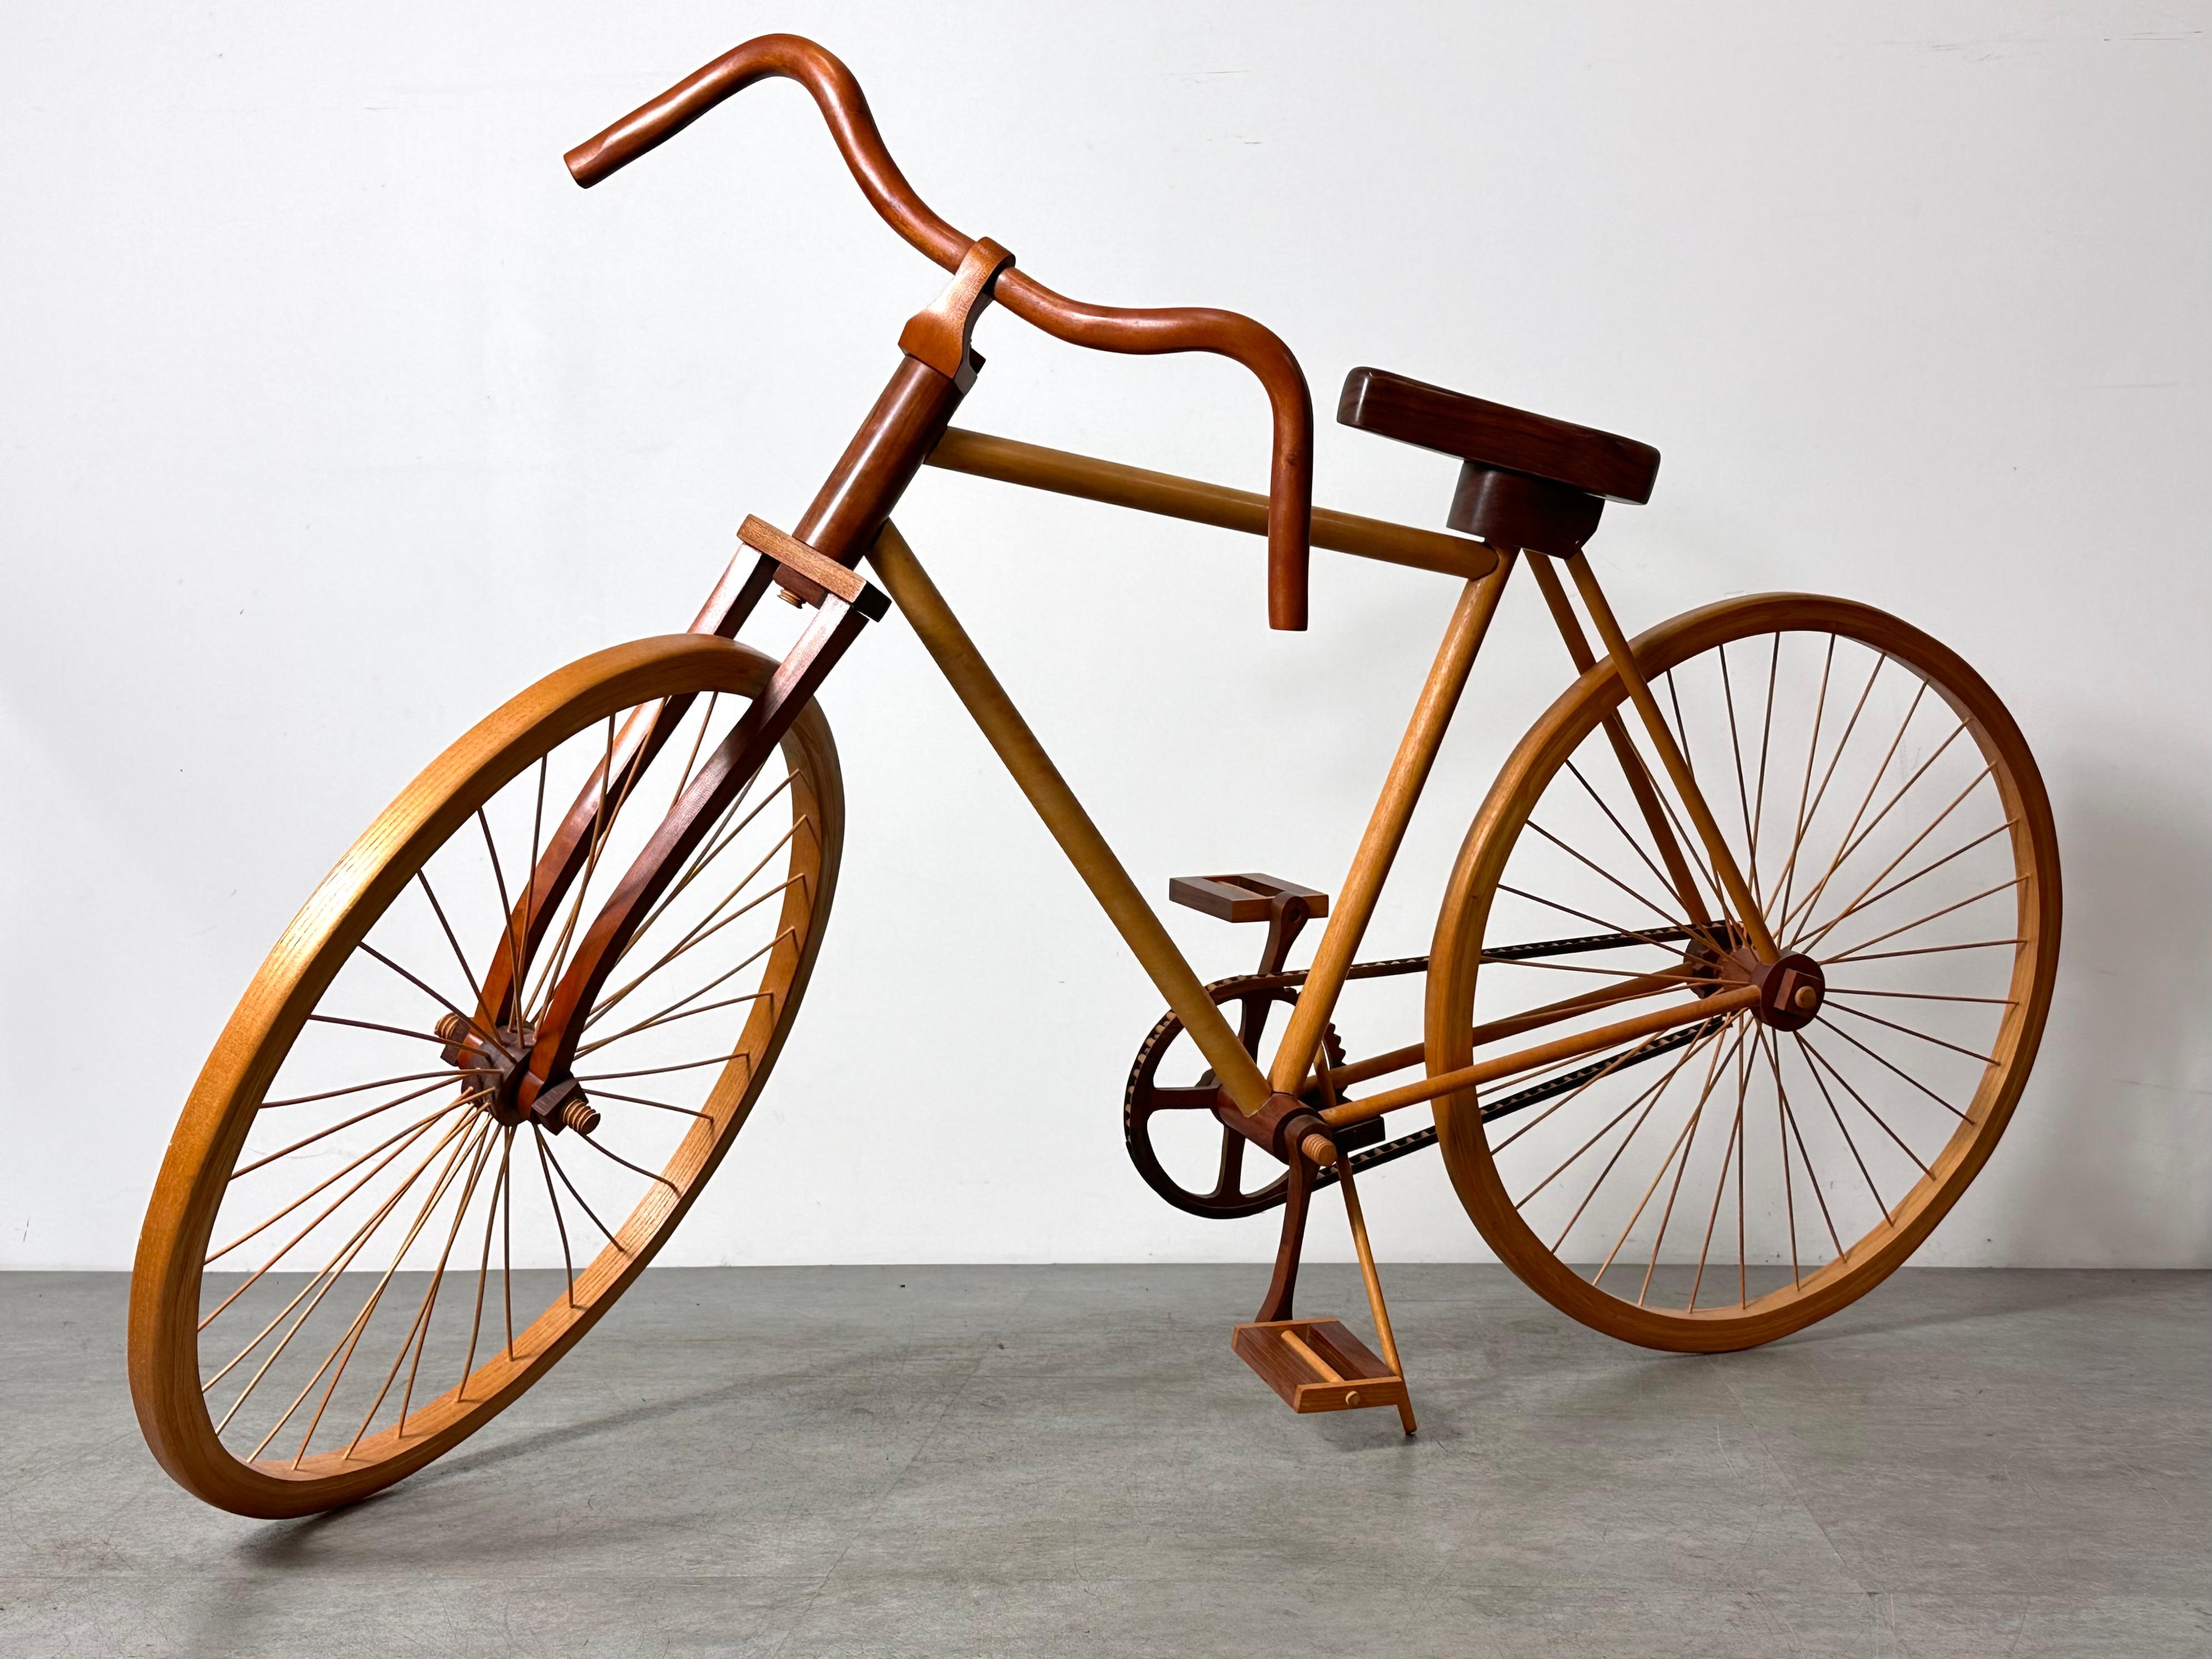 American Studio Craft Life Size Wooden Bicycle Sculpture Artist Signed 1988 For Sale 1